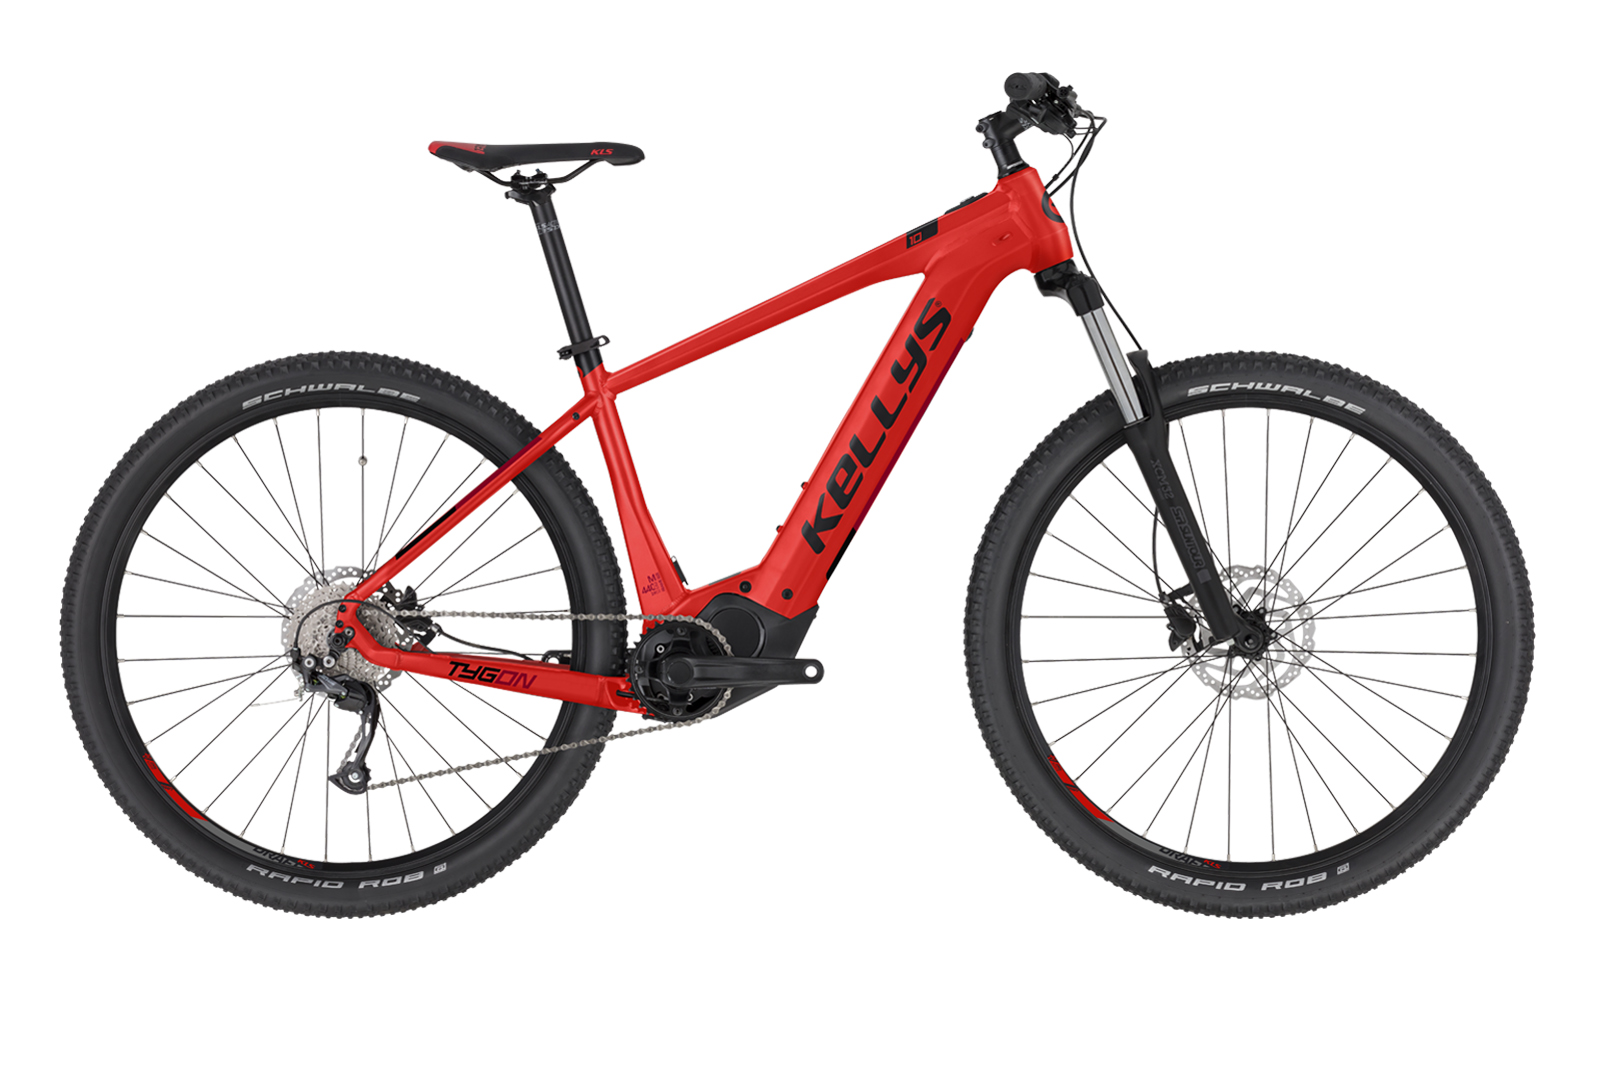 KELLYS Tygon 10 P Red M 29" 630Wh